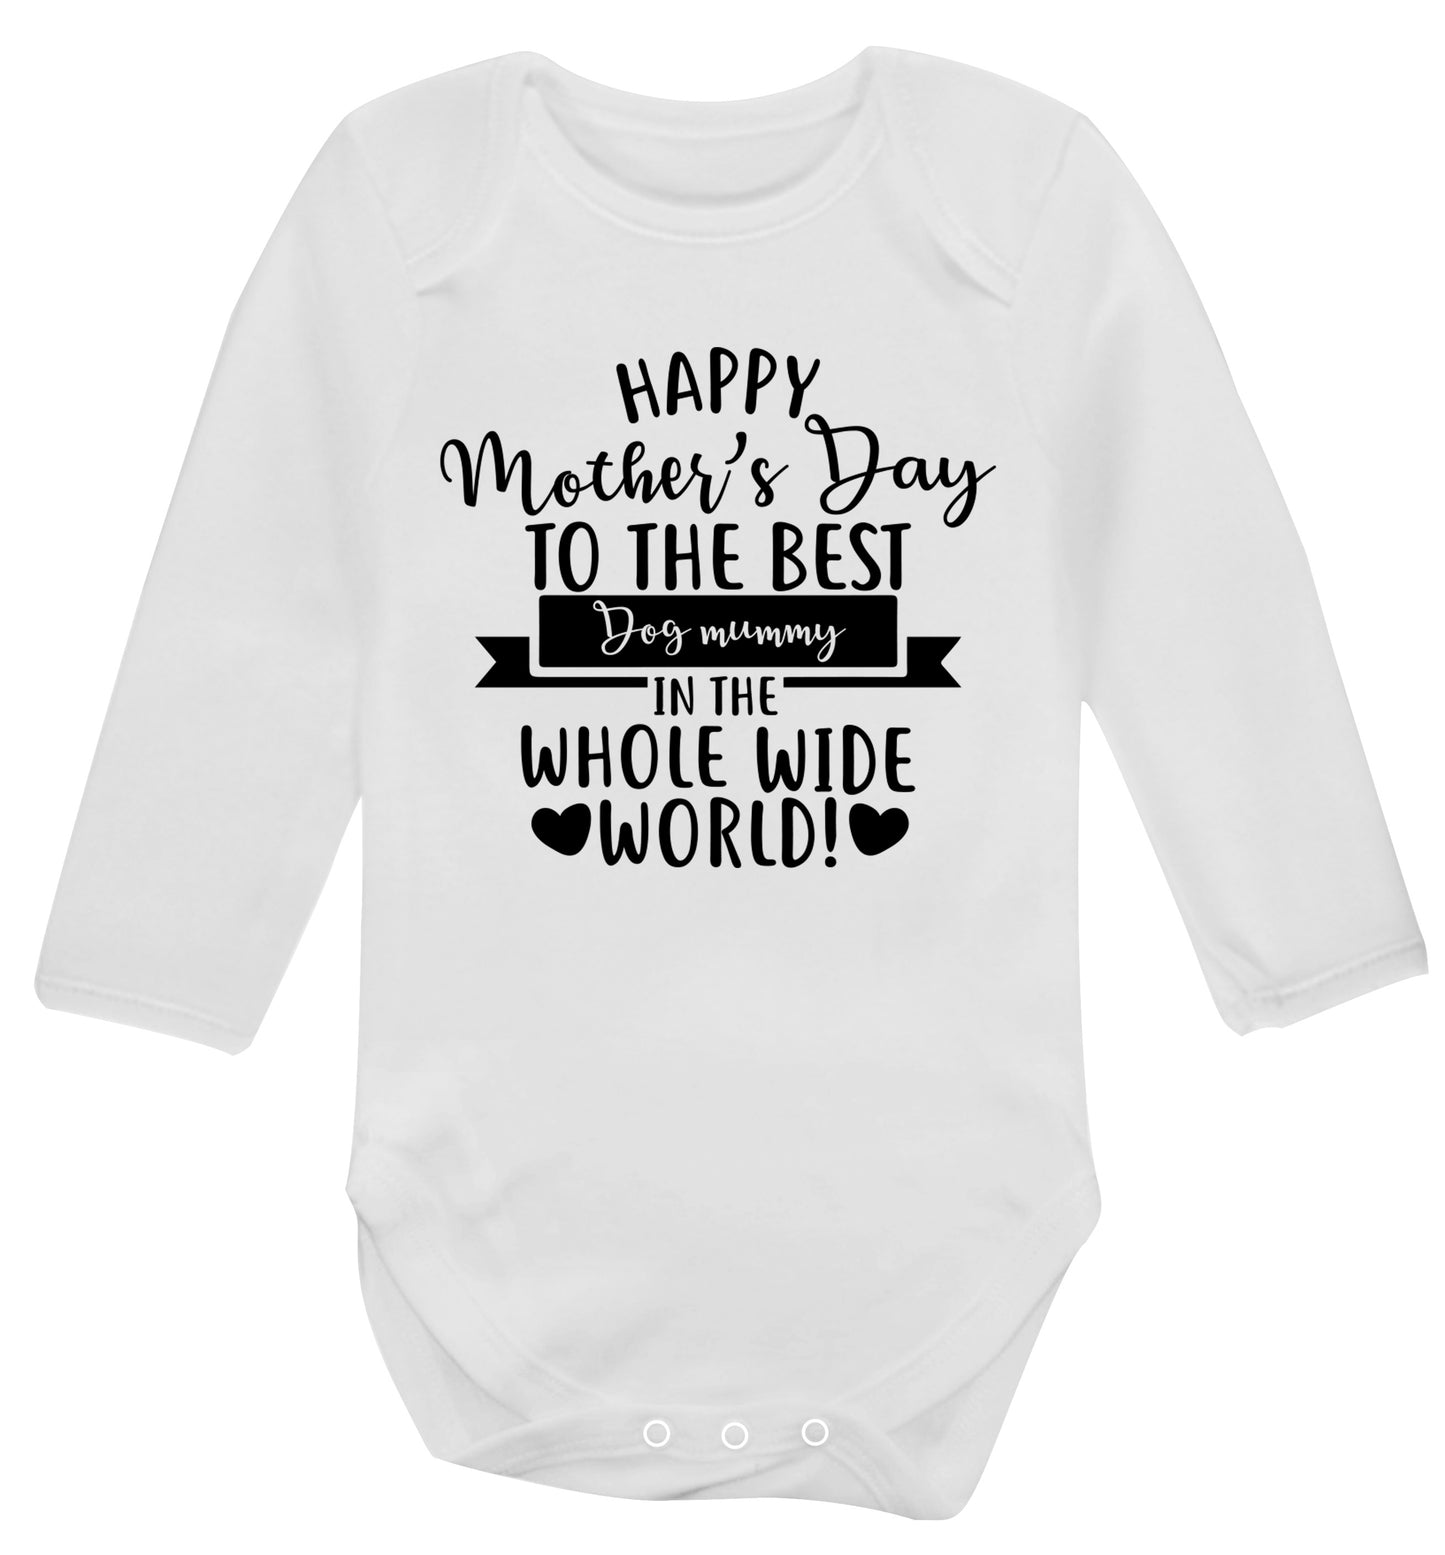 Happy mother's day to the best dog mummy in the world Baby Vest long sleeved white 6-12 months